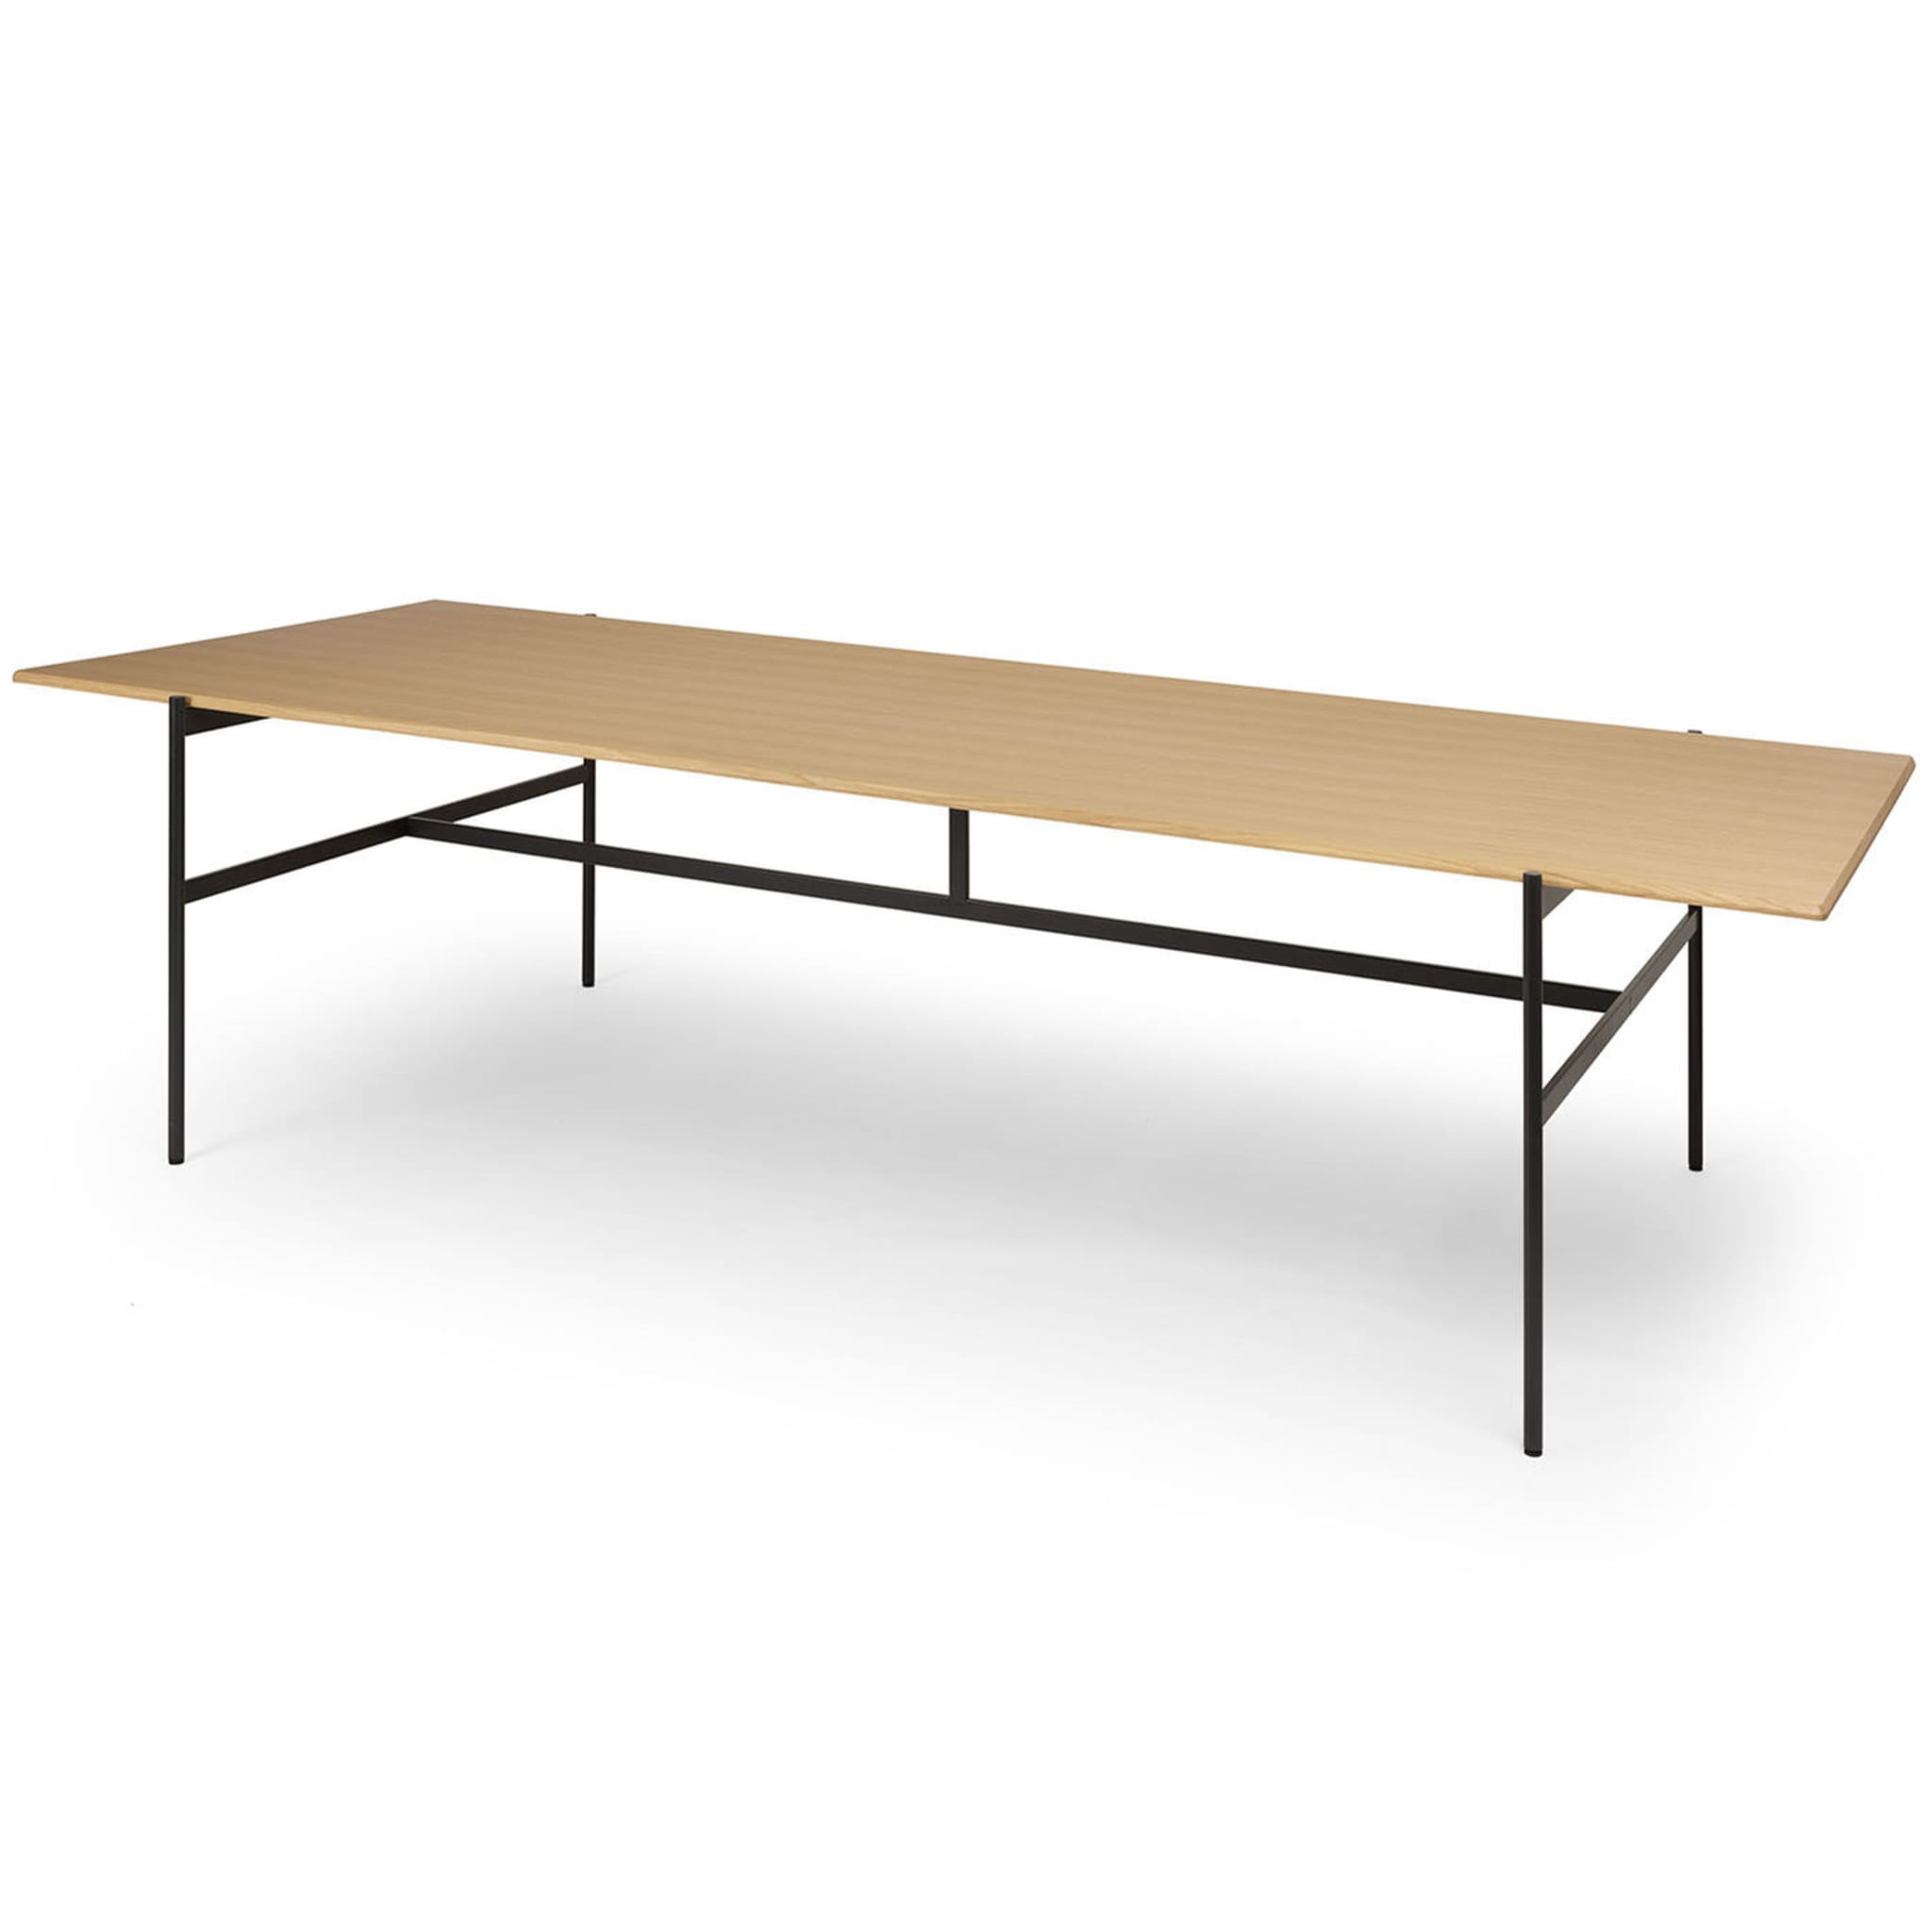 Blade Dining Table - Alternative view 2